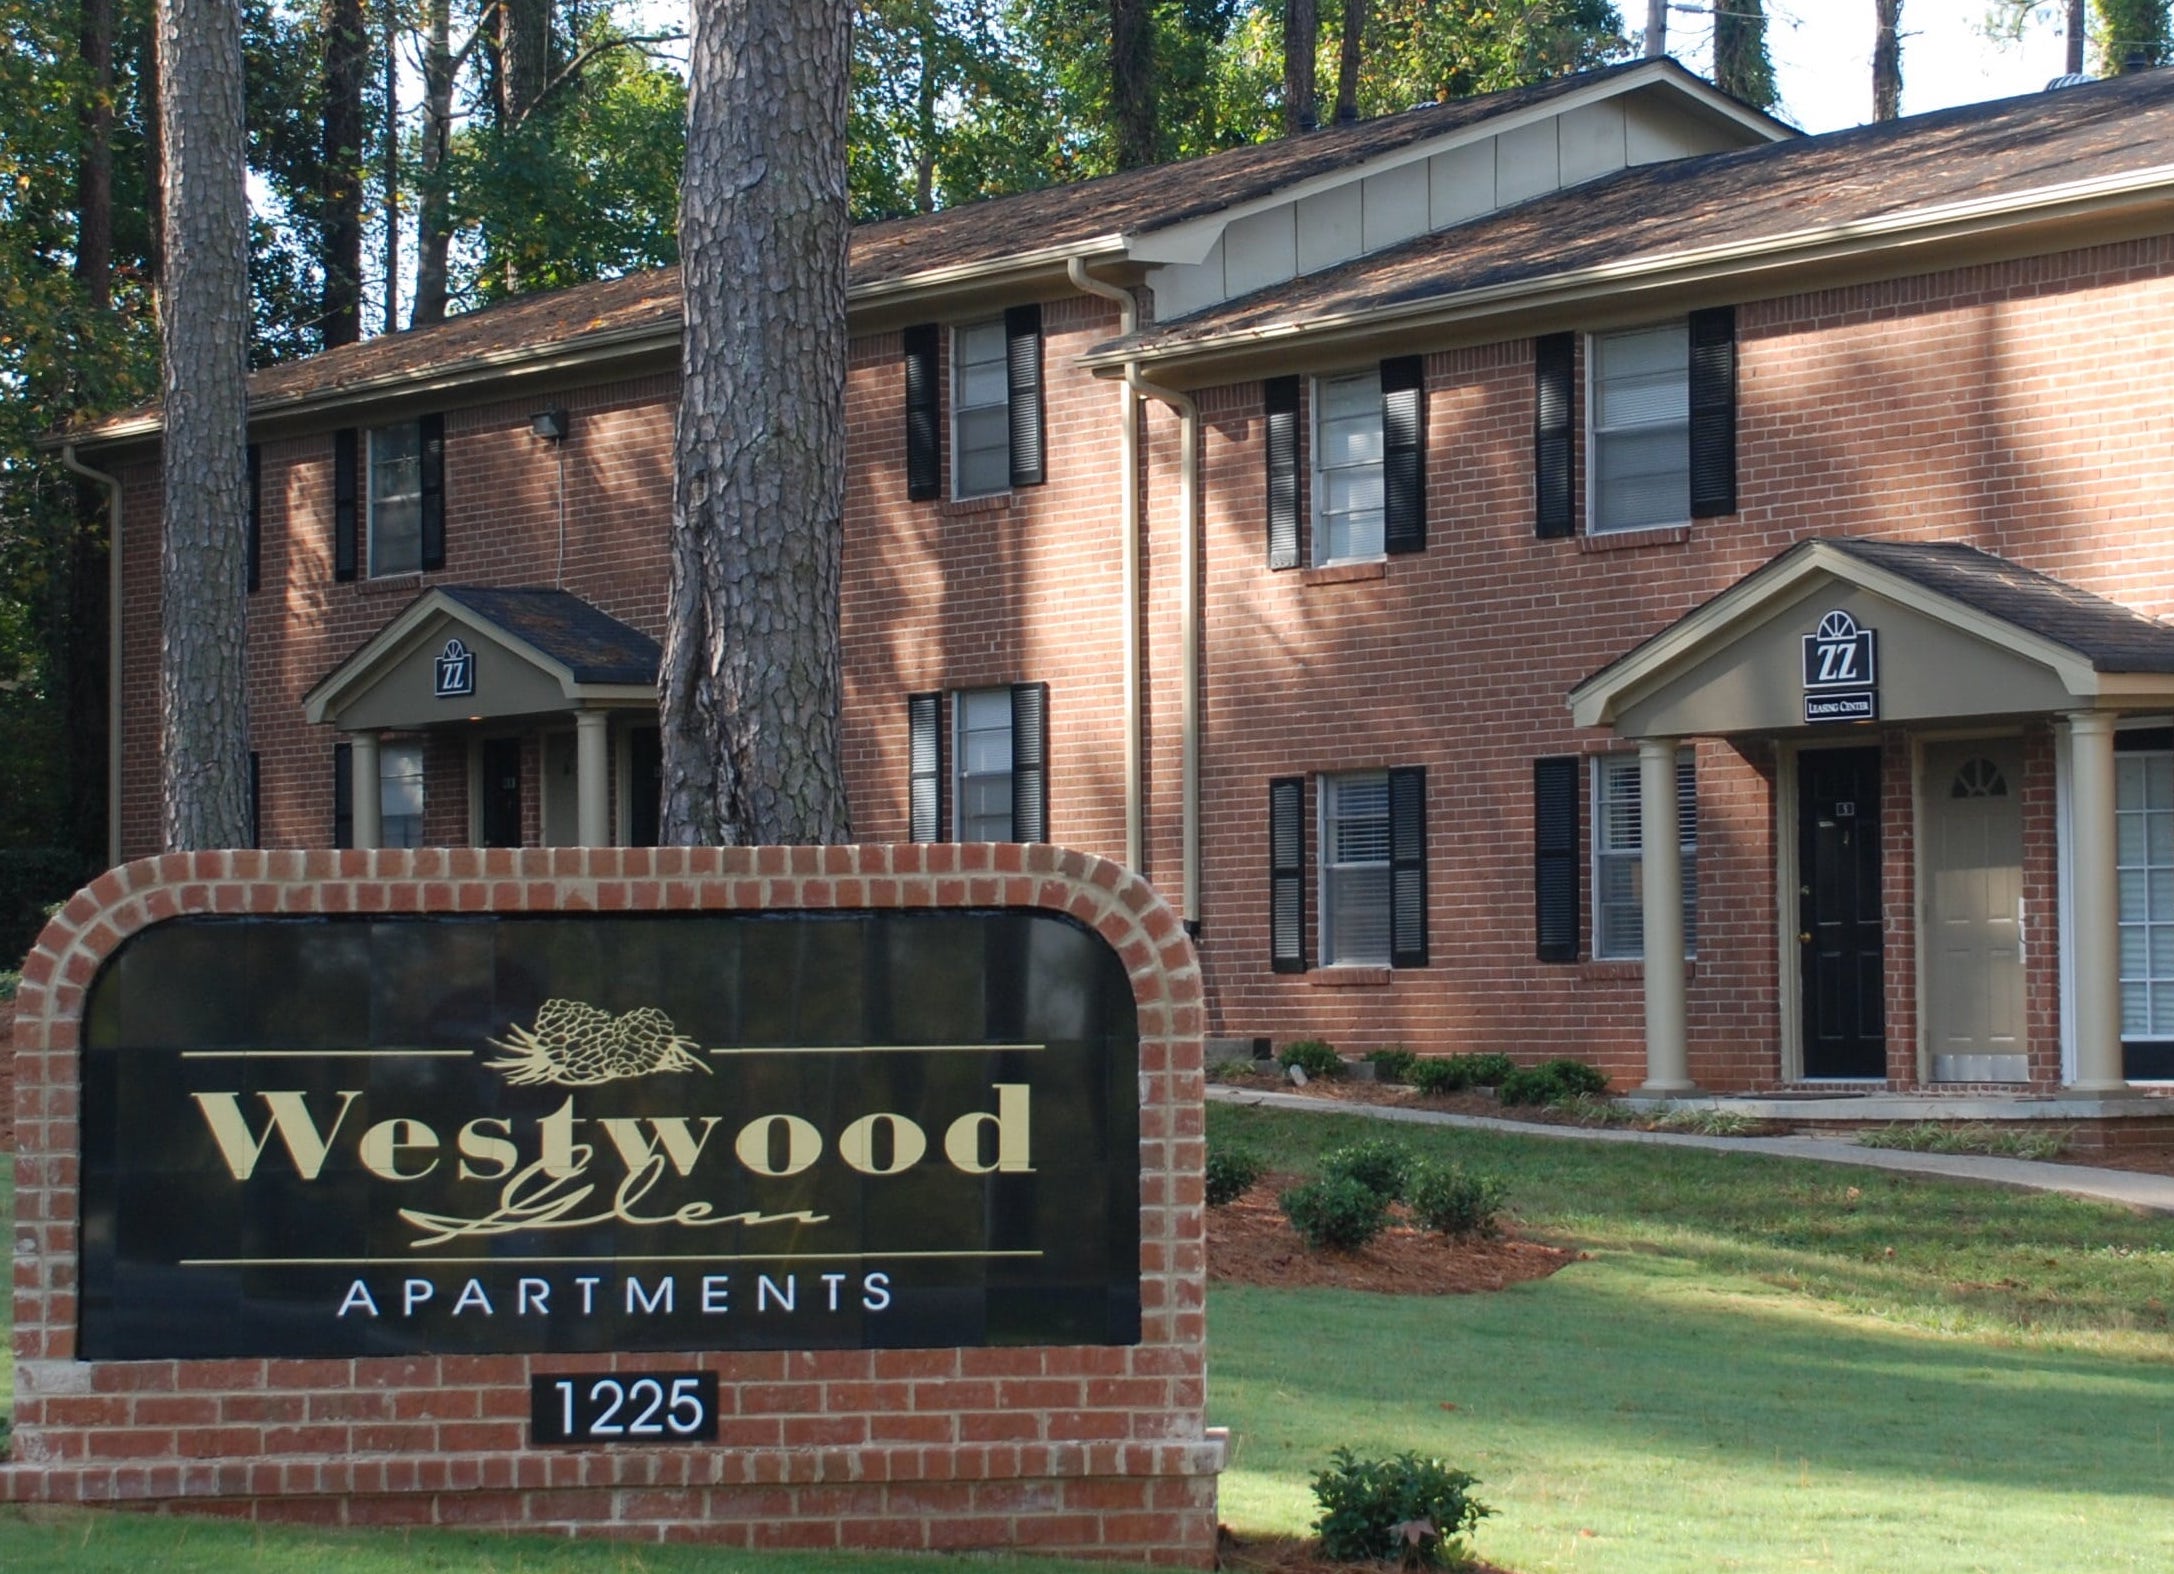 FCP Marks Ninth Investment in West Atlanta Market With Acquisition of 247-Unit Westwood Glen Apartment Community for $24.5 Million